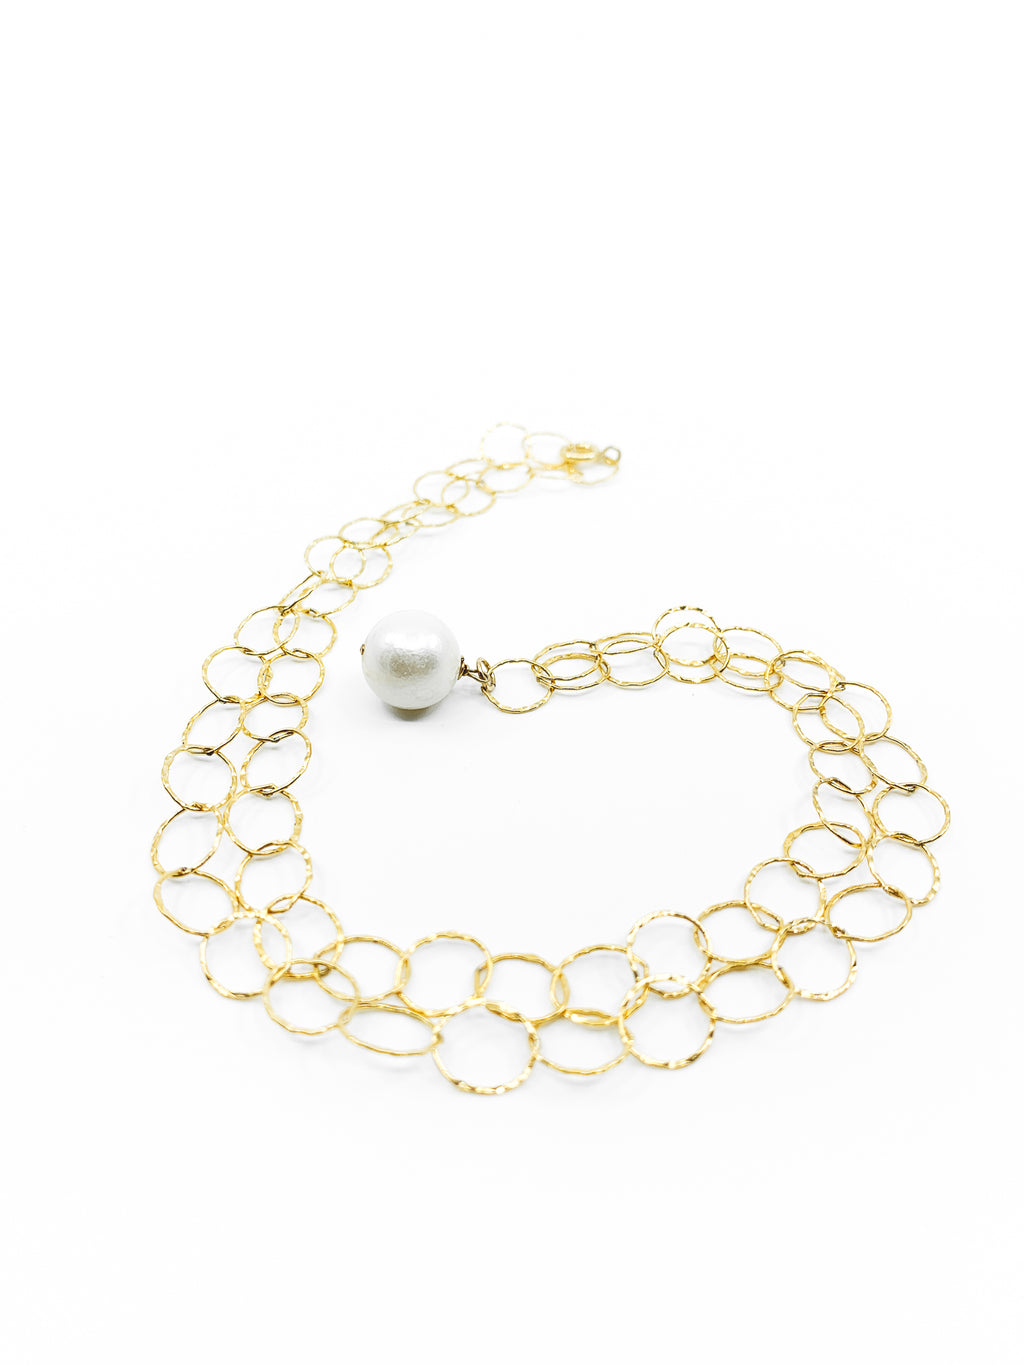 white pearl round gold chain necklace by eve black jewelry made in Hawaii